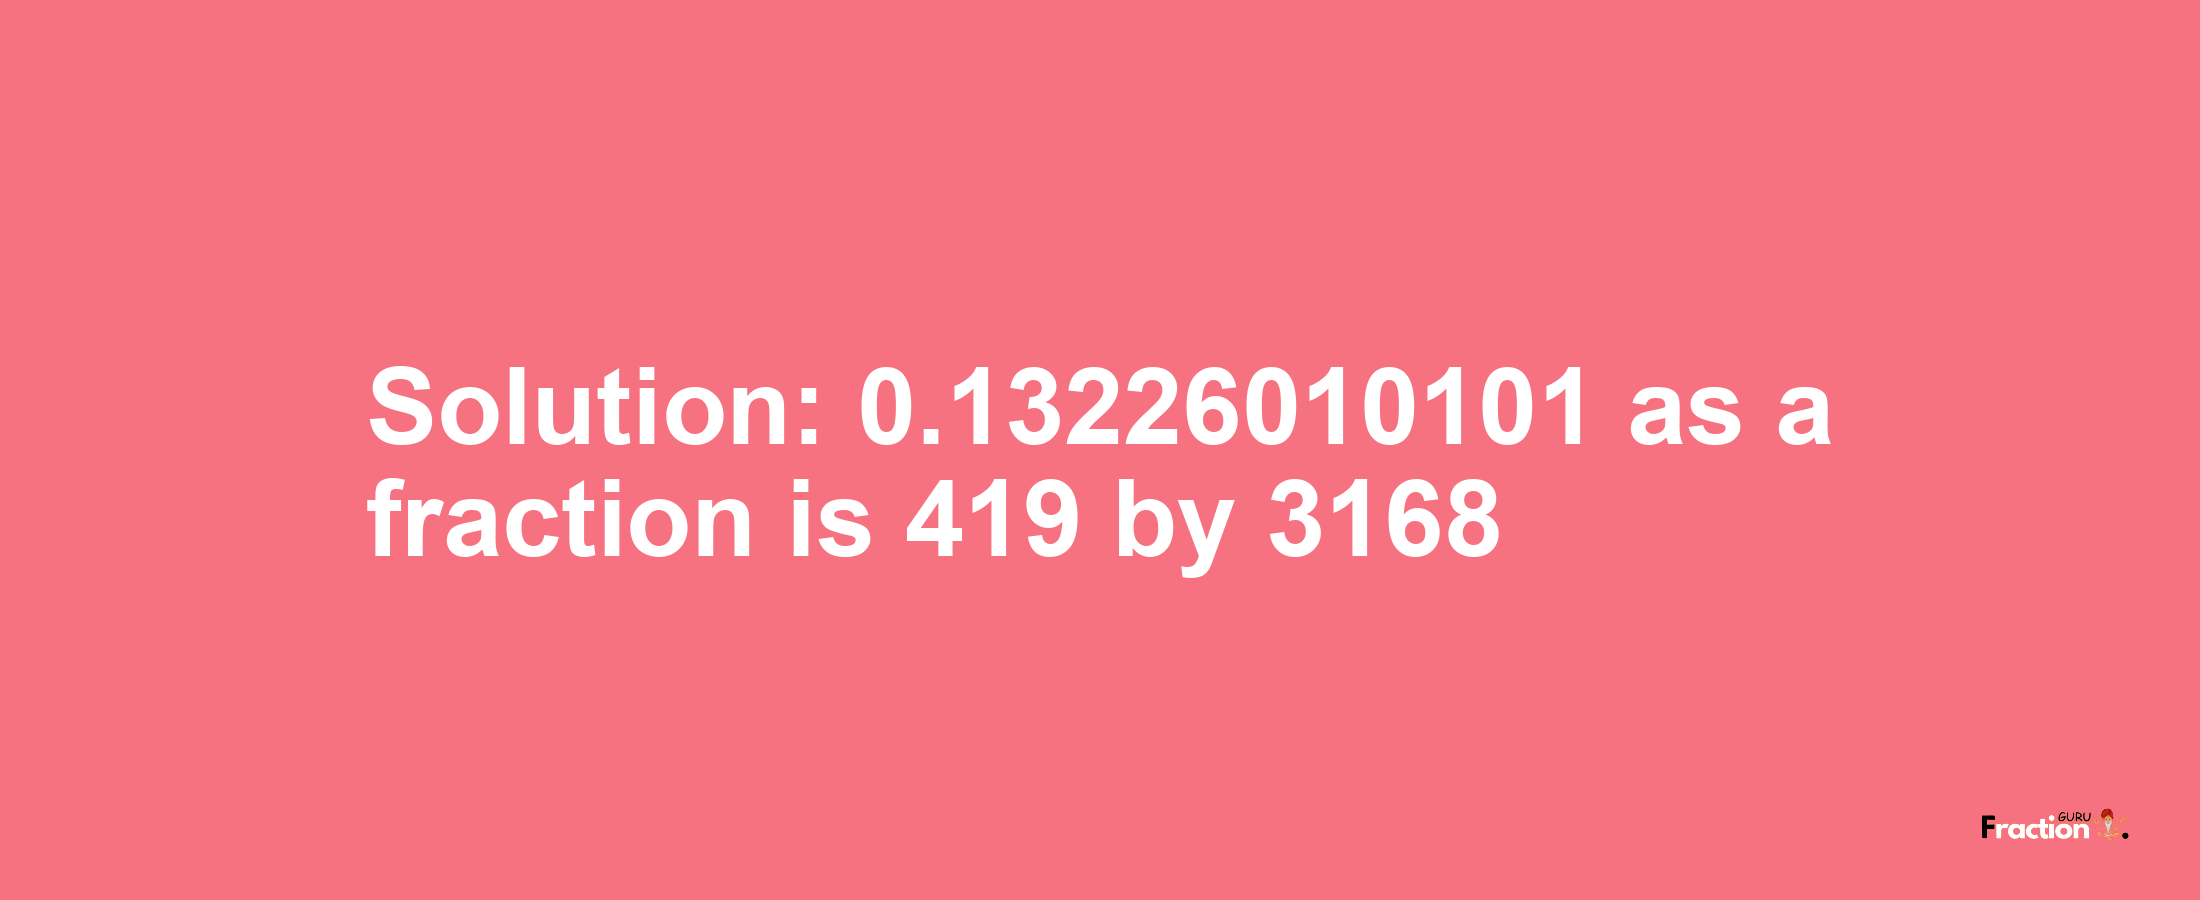 Solution:0.13226010101 as a fraction is 419/3168